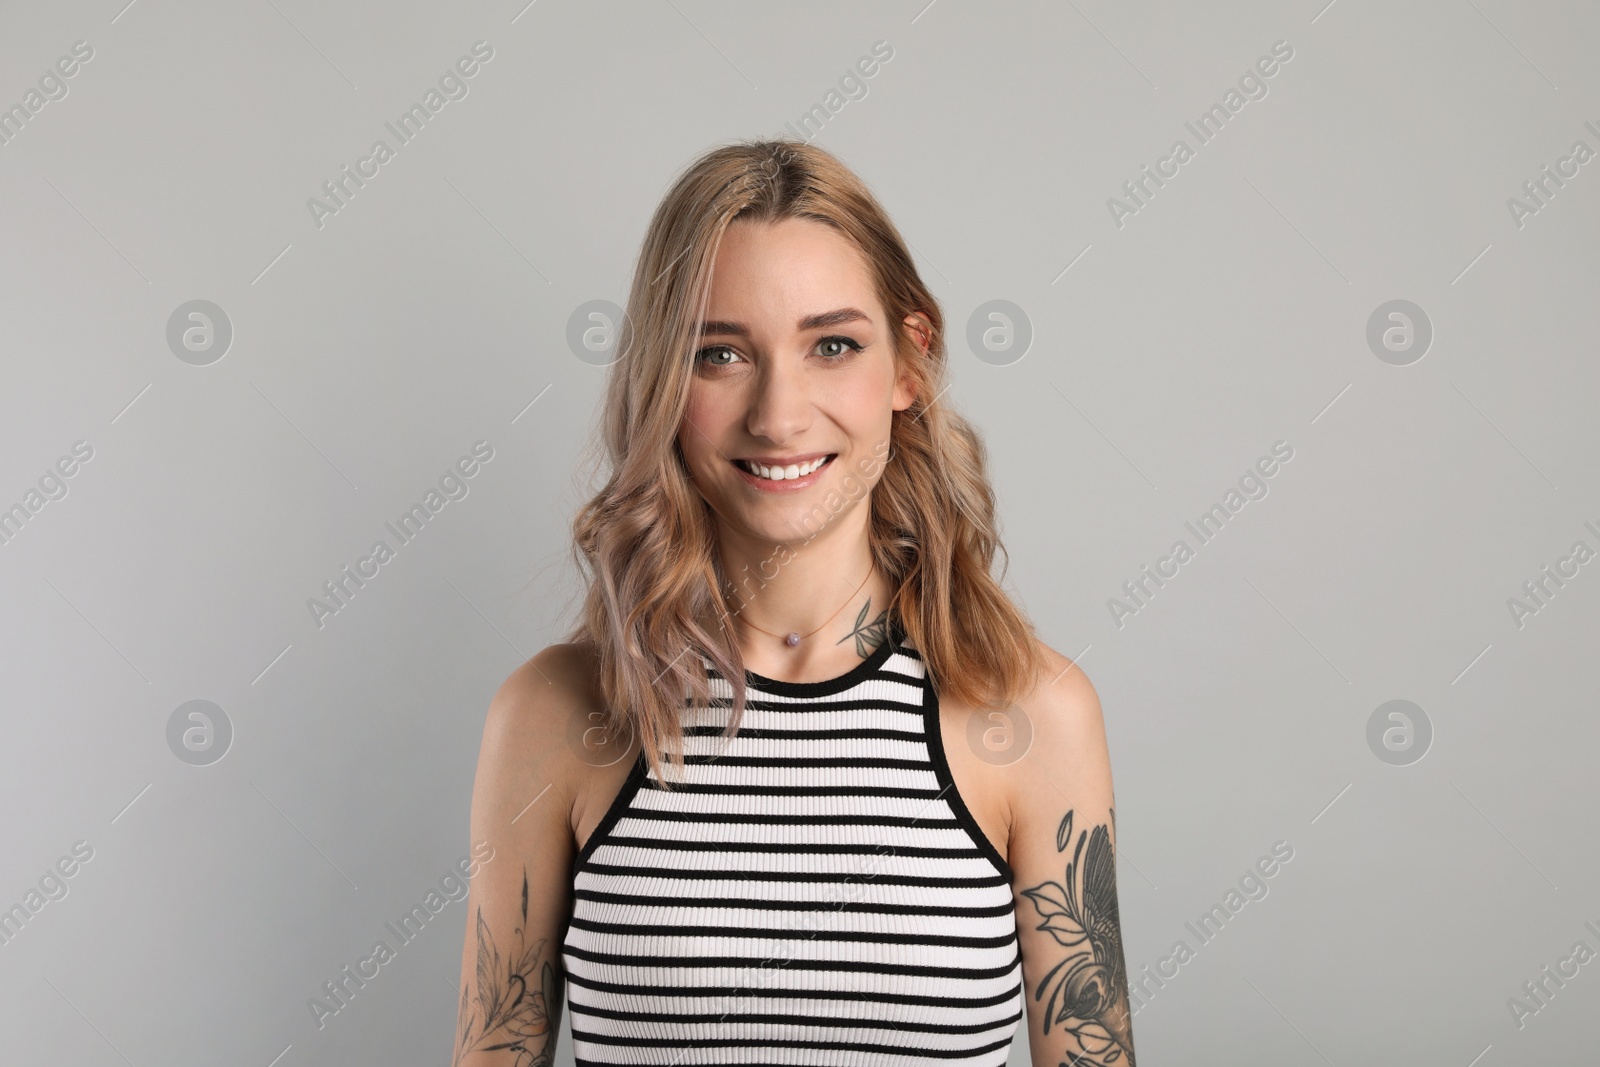 Photo of Beautiful woman with tattoos on body against grey background